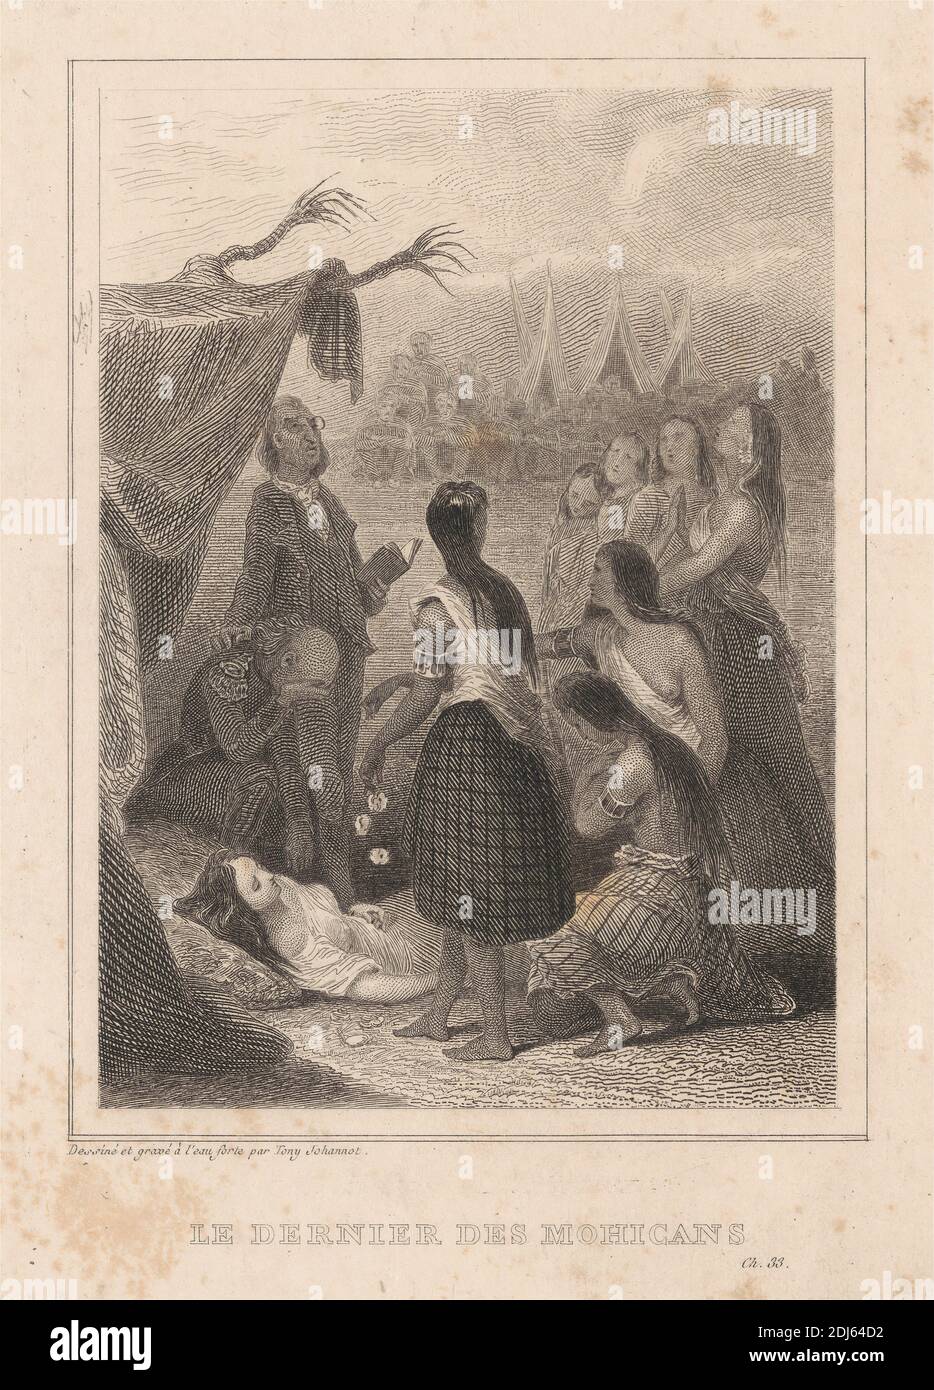 Le Dernier Des Mohicans, Print made by Tony Johannot, 1803–1852, French, undated, Line engraving on medium, slightly textured, cream wove paper Stock Photo